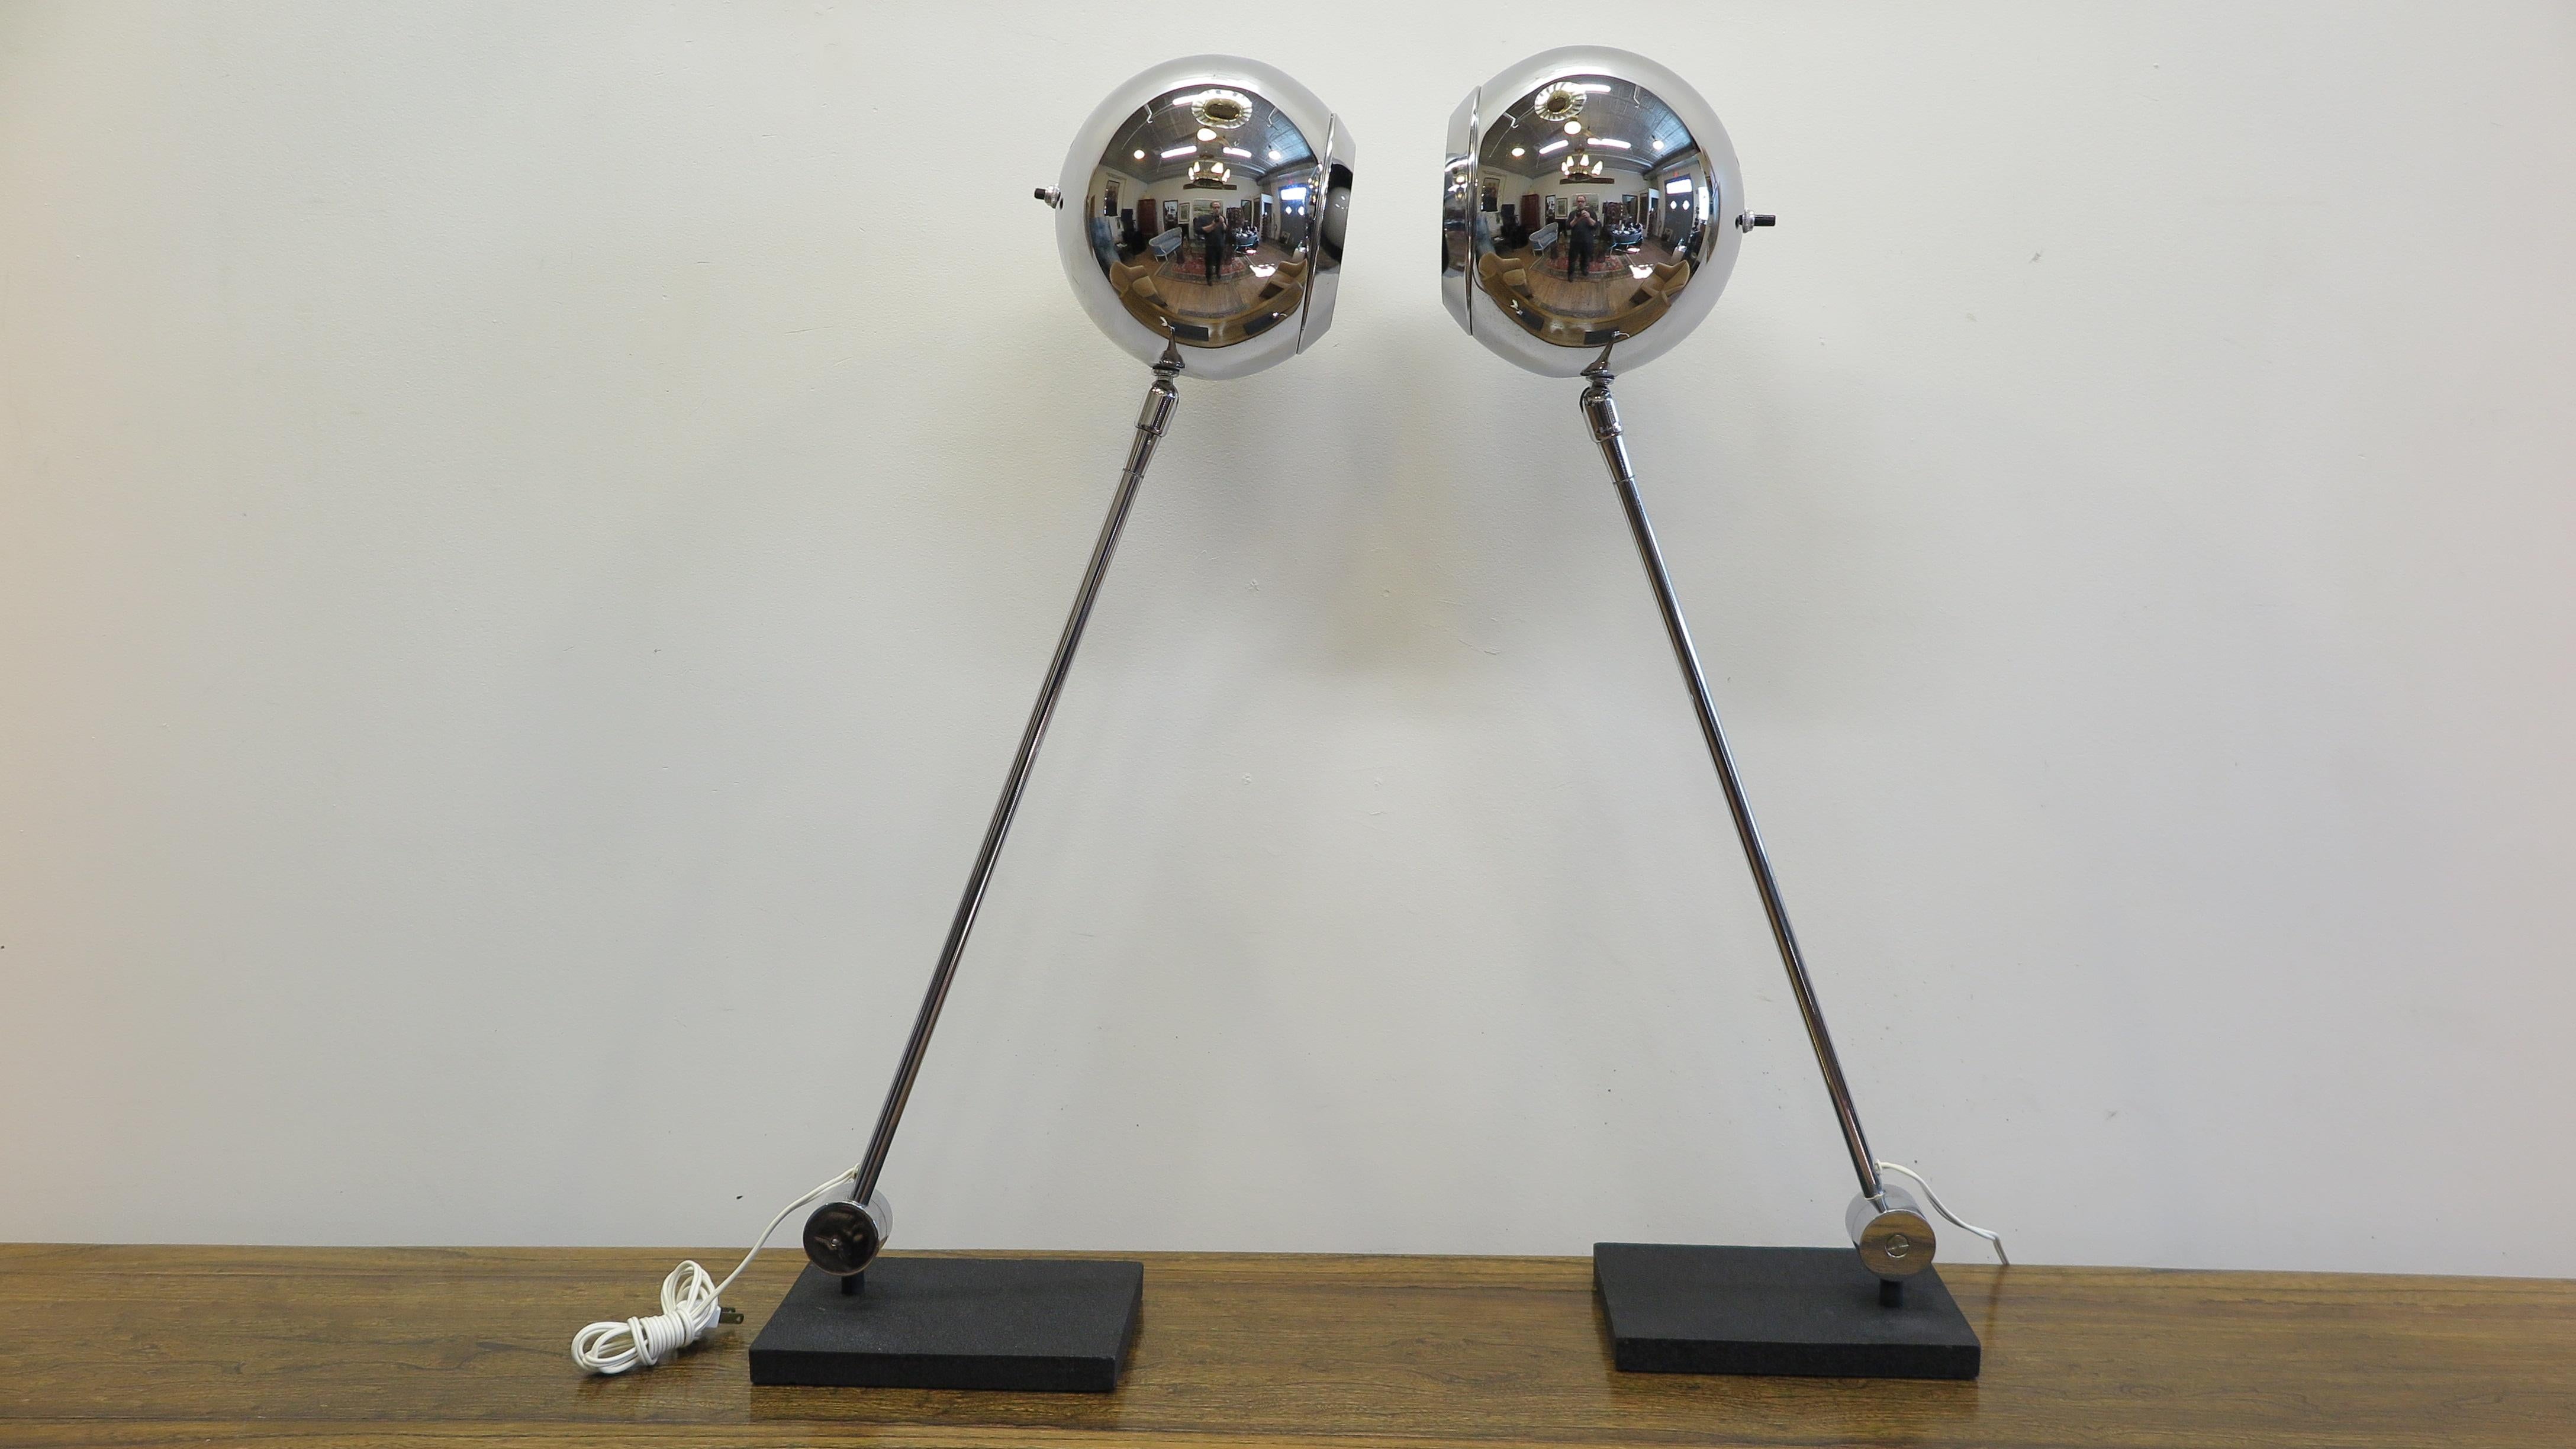 A pair of Robert Sonneman articulating table lamps. Robert Sonneman's iconic eyeball lamps mounted to Steel bases having articulating movement to both the Eyeball shade diffusers and arms. Shade diffusers have the Eyeball detail which is the boarder